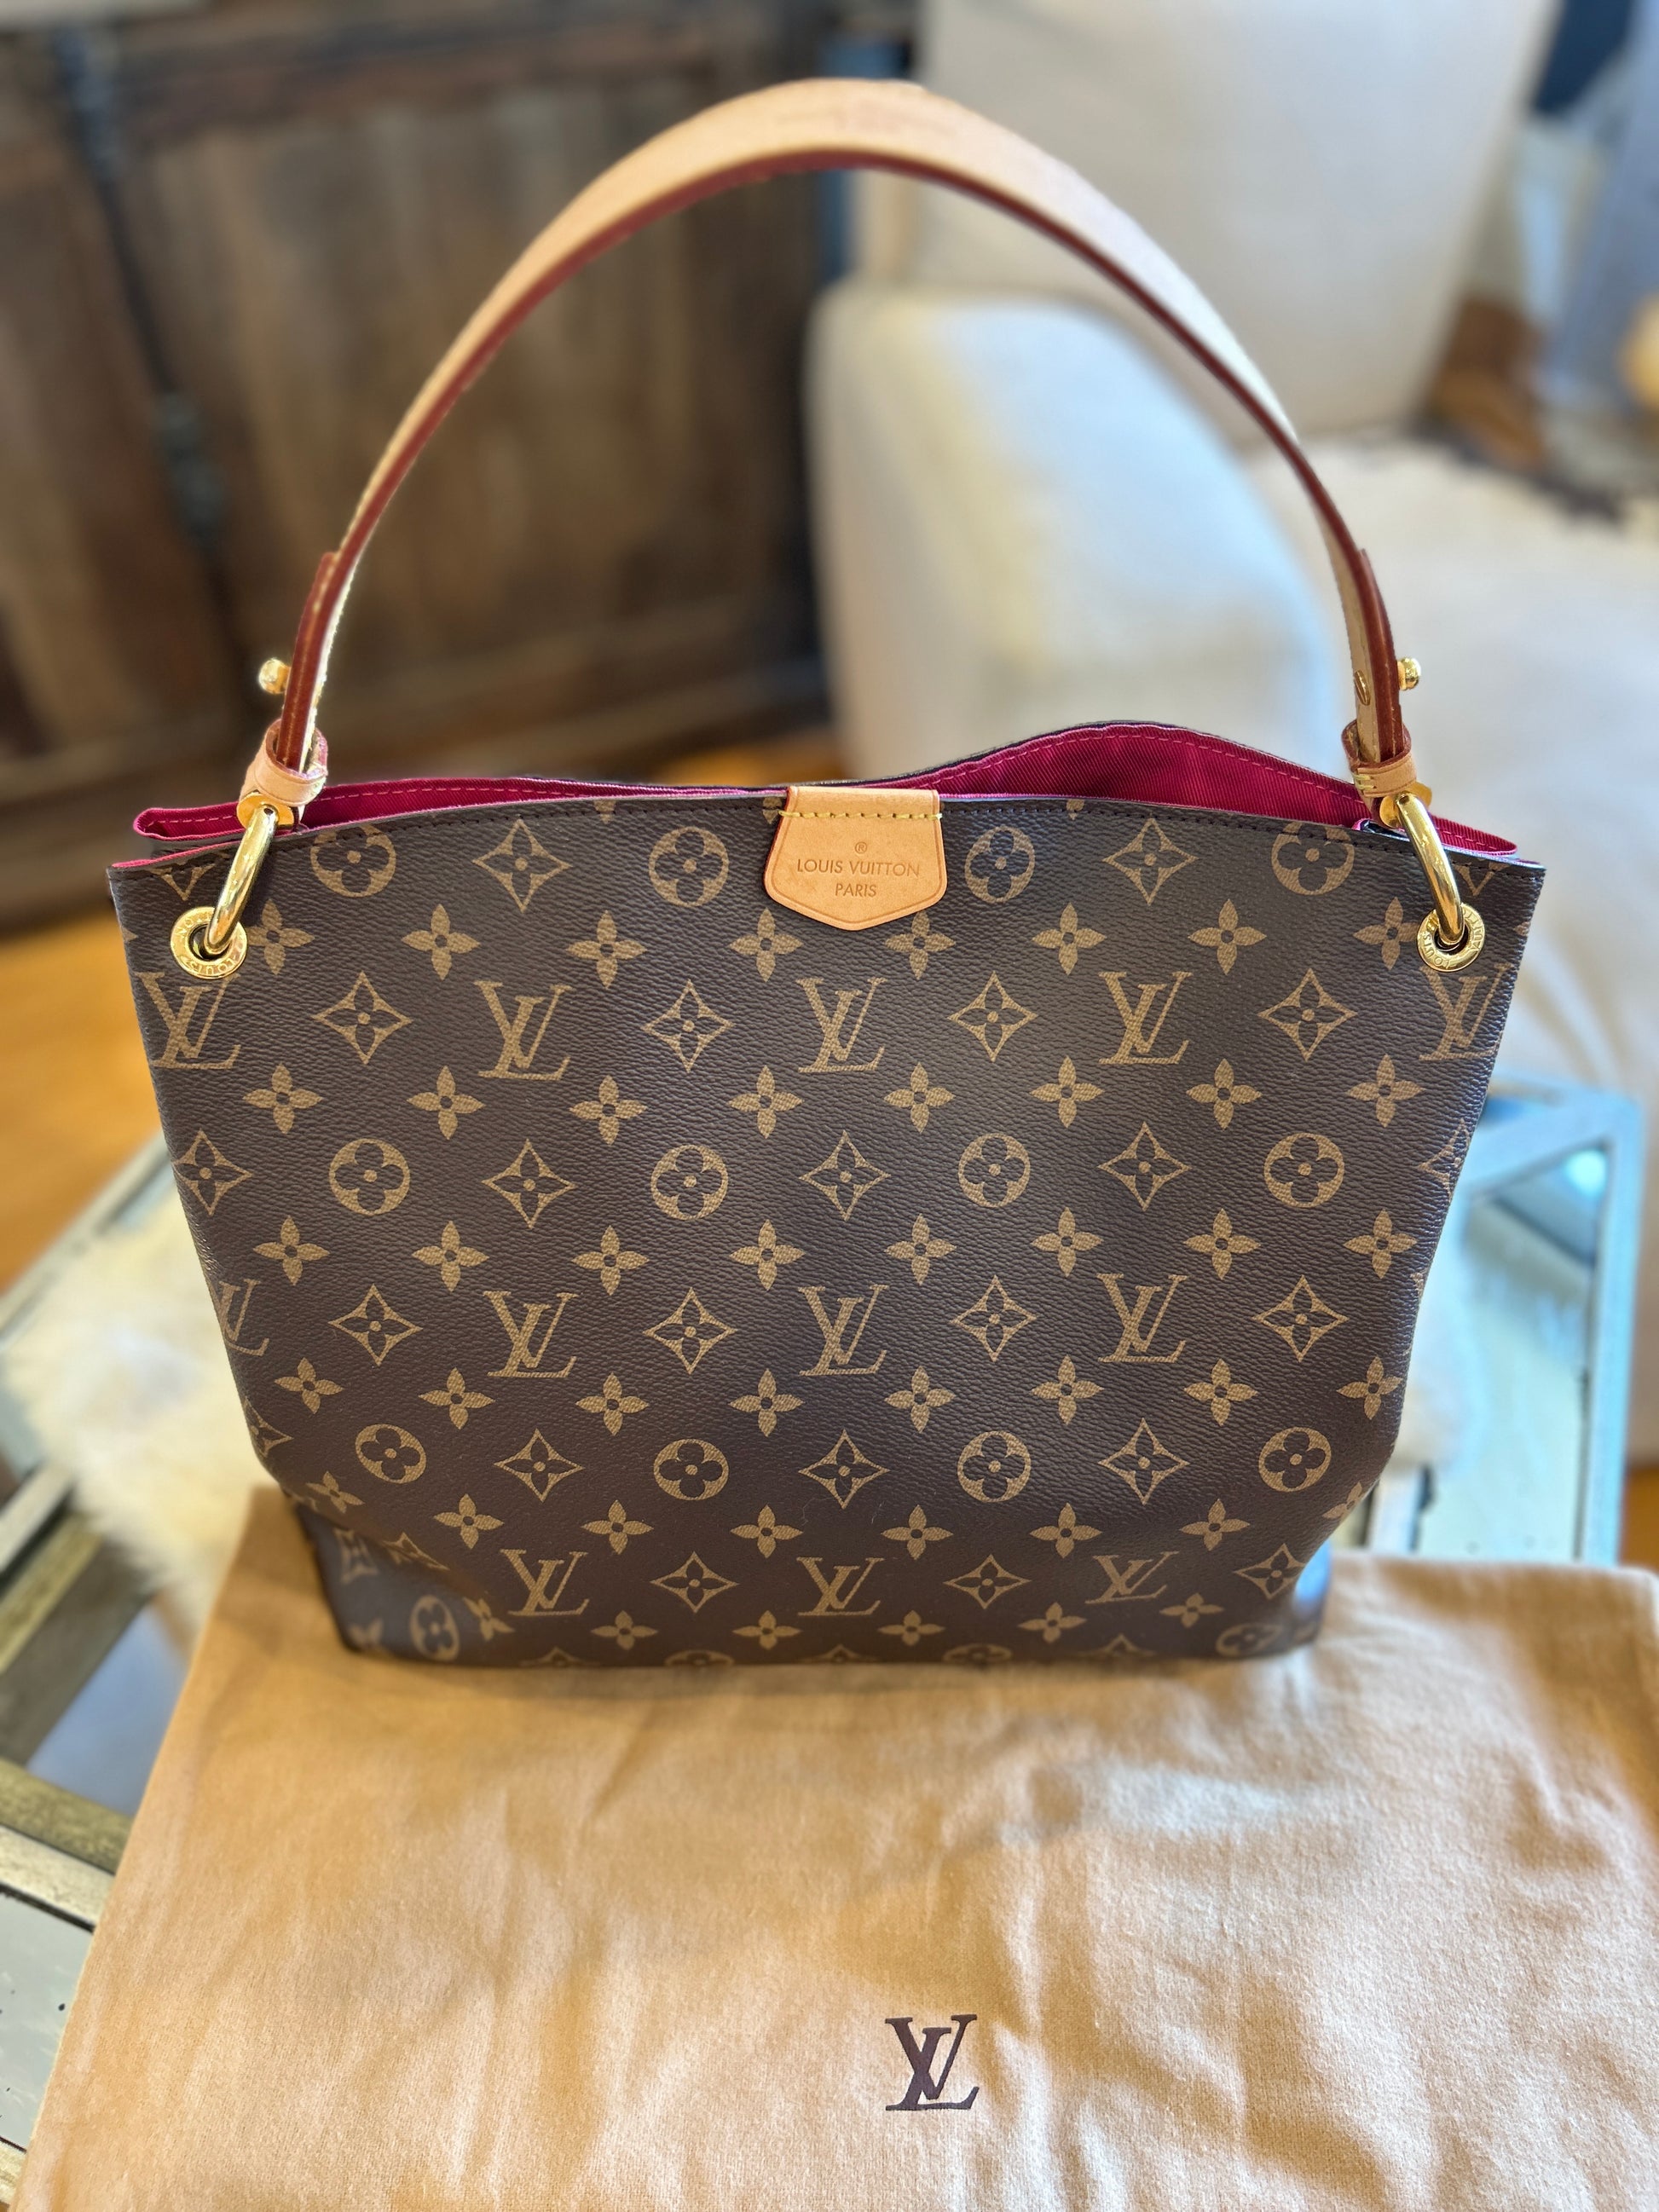 LV Delightful vs Graceful - thoughts? : r/Louisvuitton